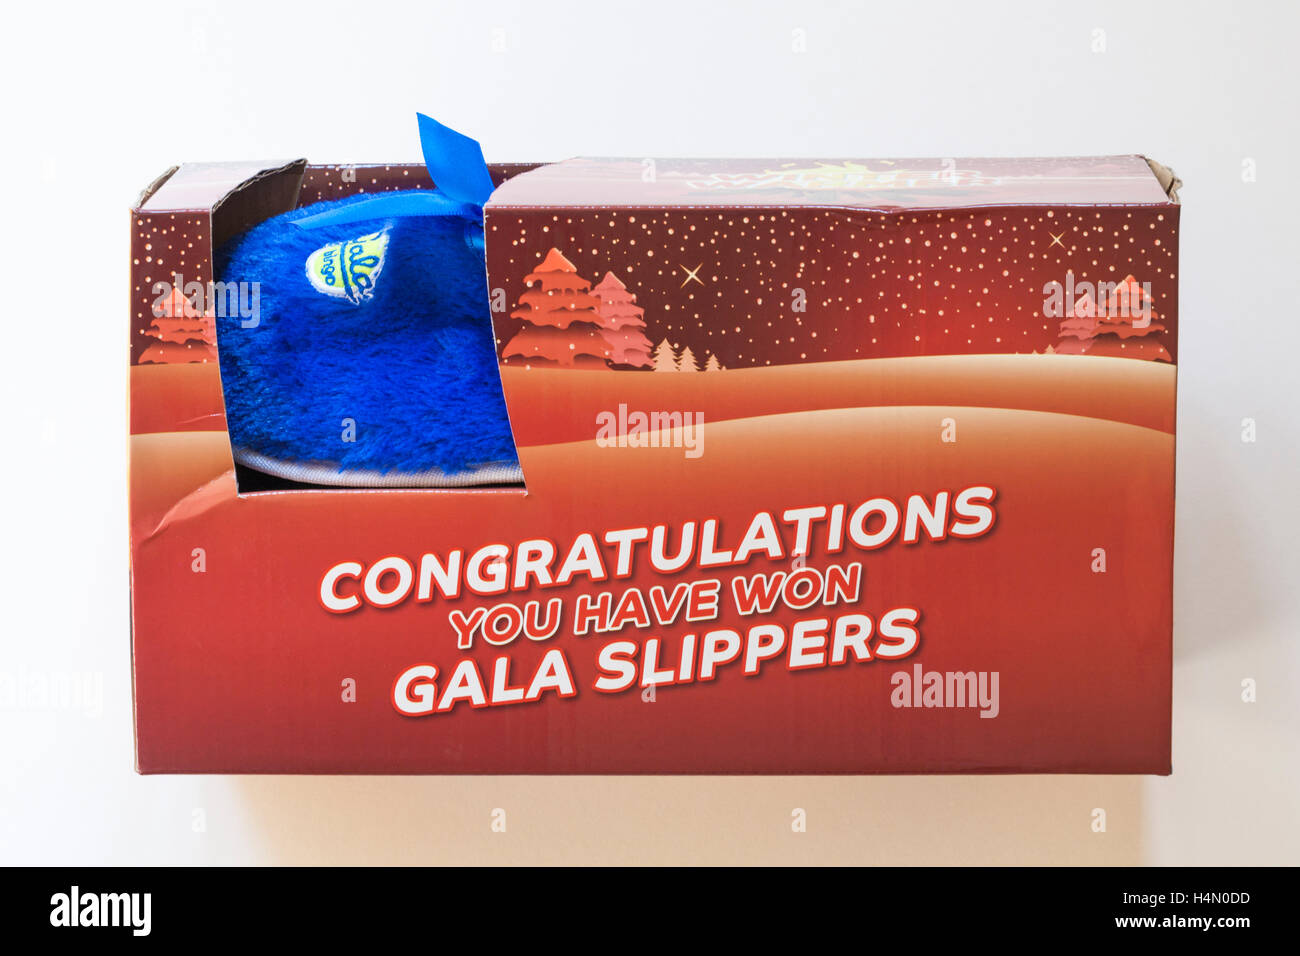 Bingo prize - Congratulations you have won gala slippers isolated on white background Stock Photo